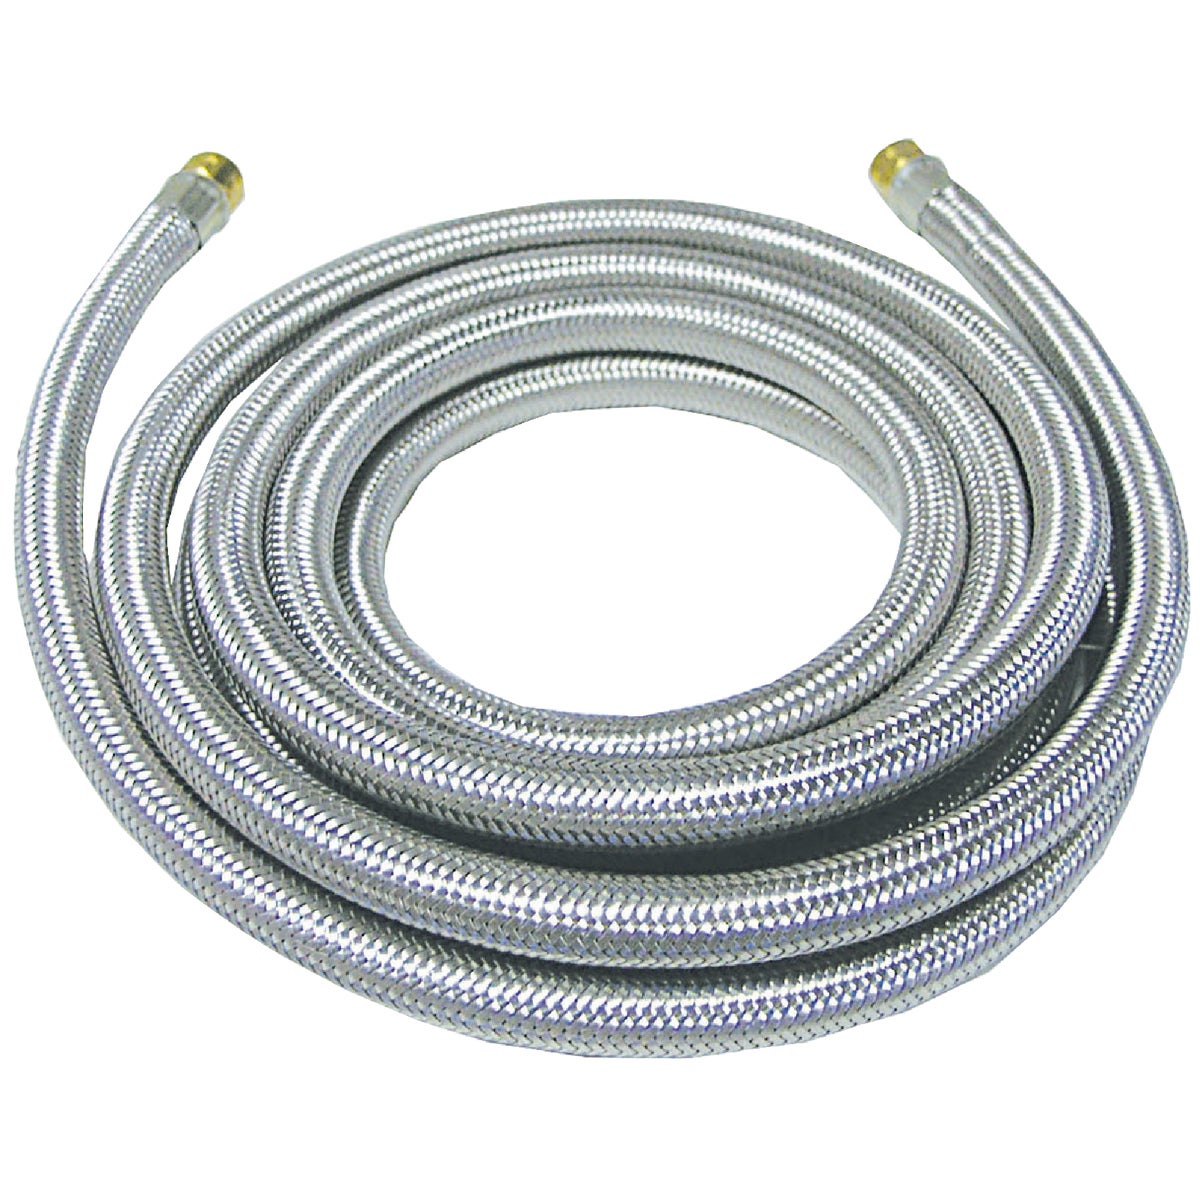 B&K 1/4 In. x 10 Ft. Ice Maker Connector Hose